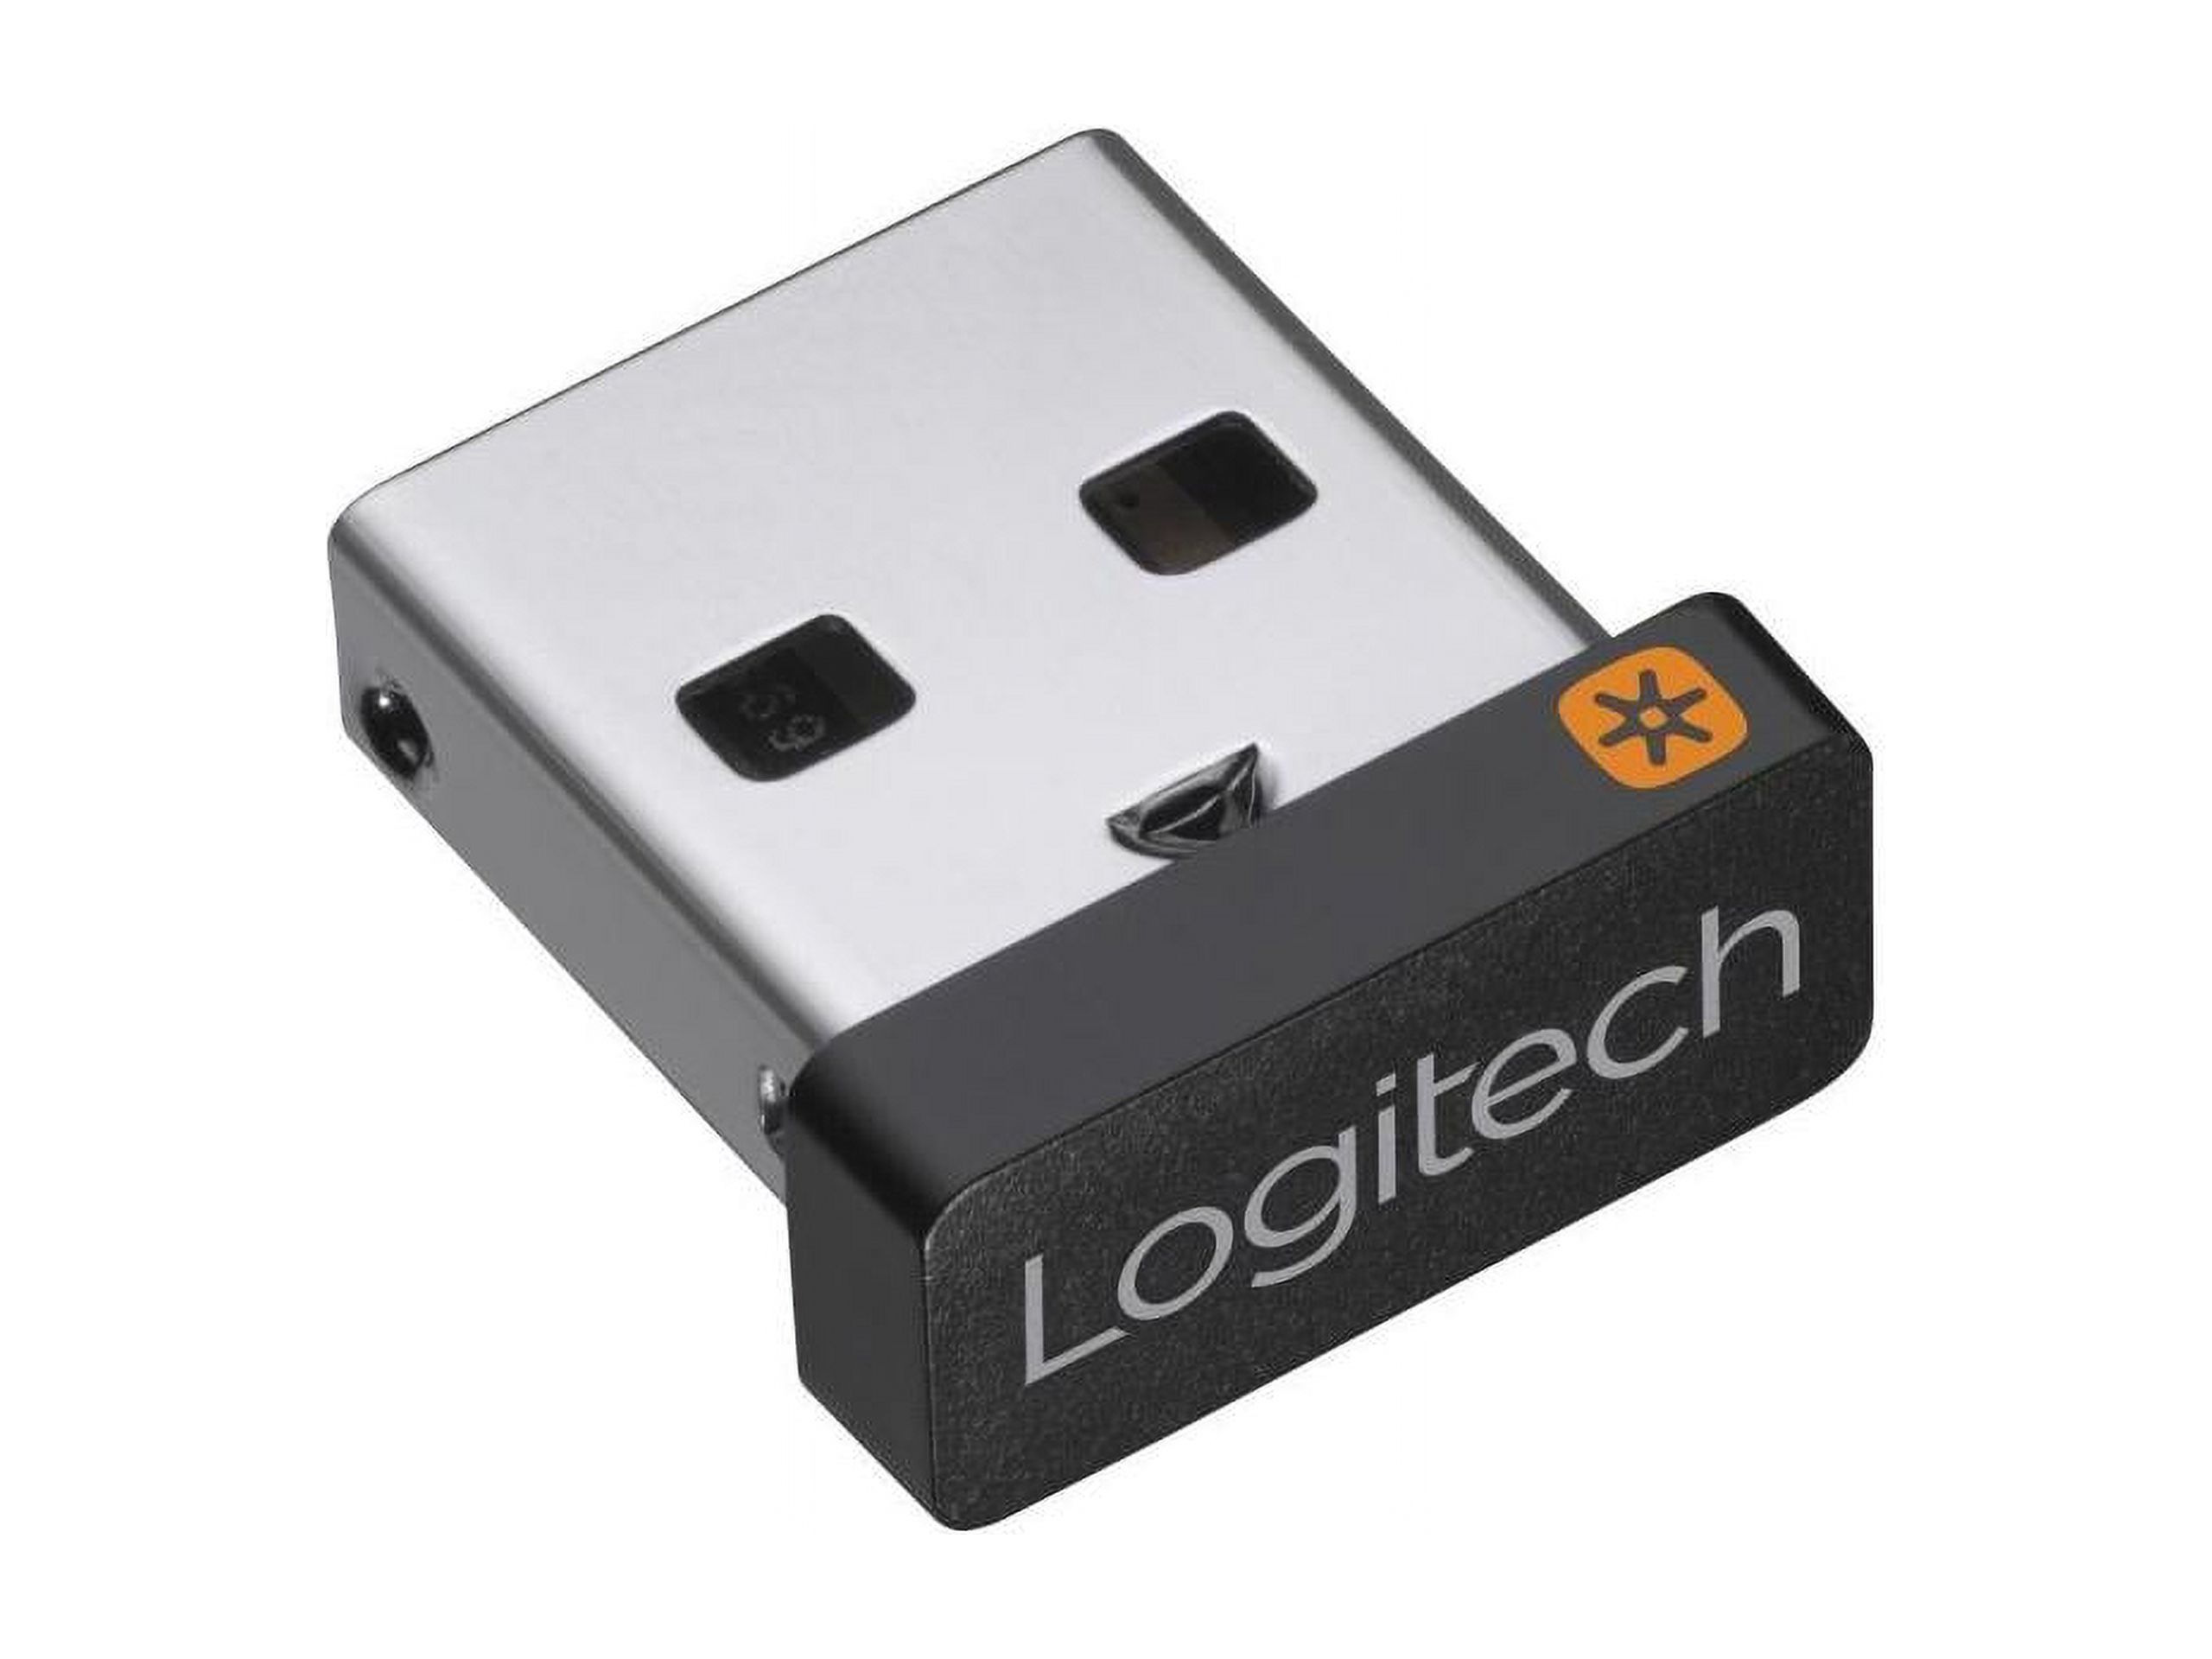 Logitech Wireless Mouse / Keyboard USB Unifying Receiver - image 4 of 20